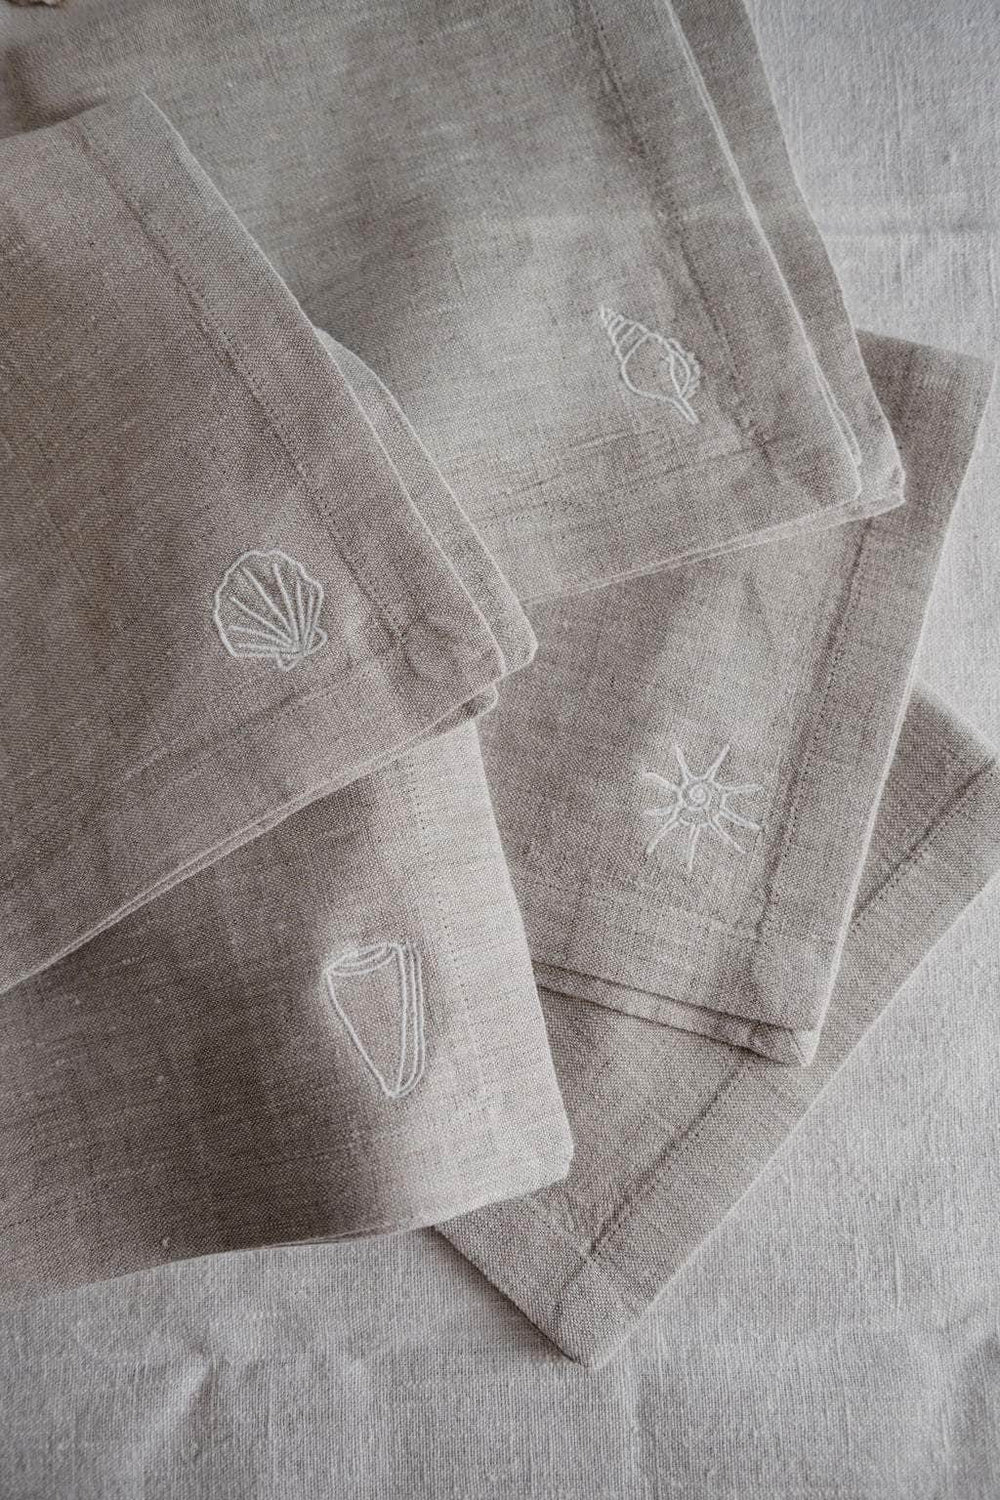 Grey Shell Embroidered Linen Napkins - Set of 4